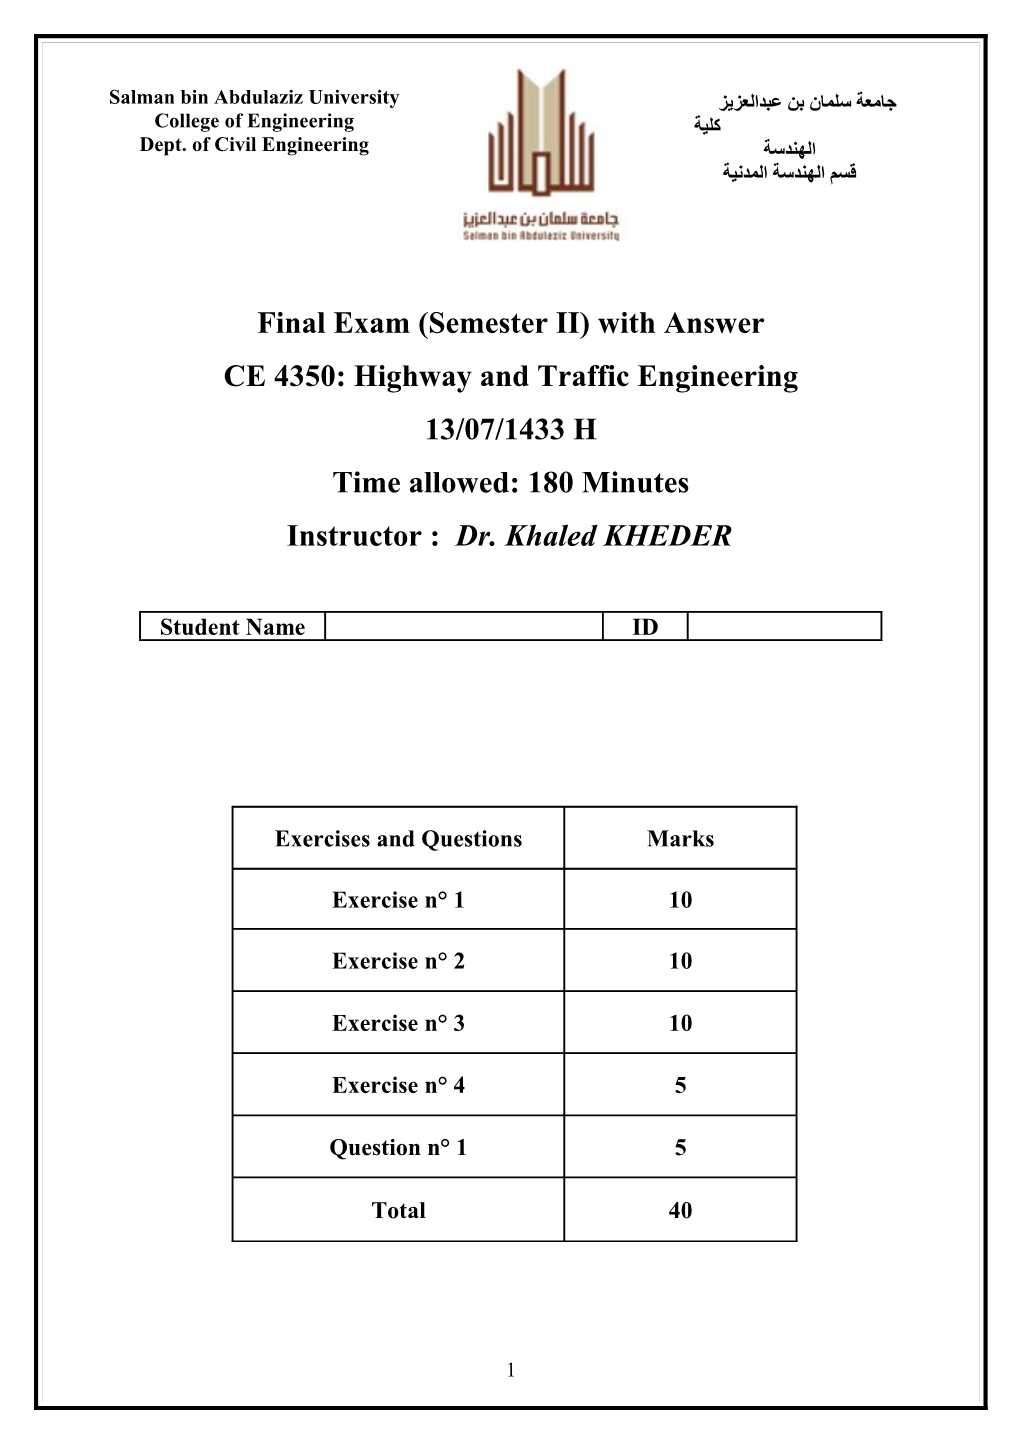 Final Exam (Semester II) with Answer